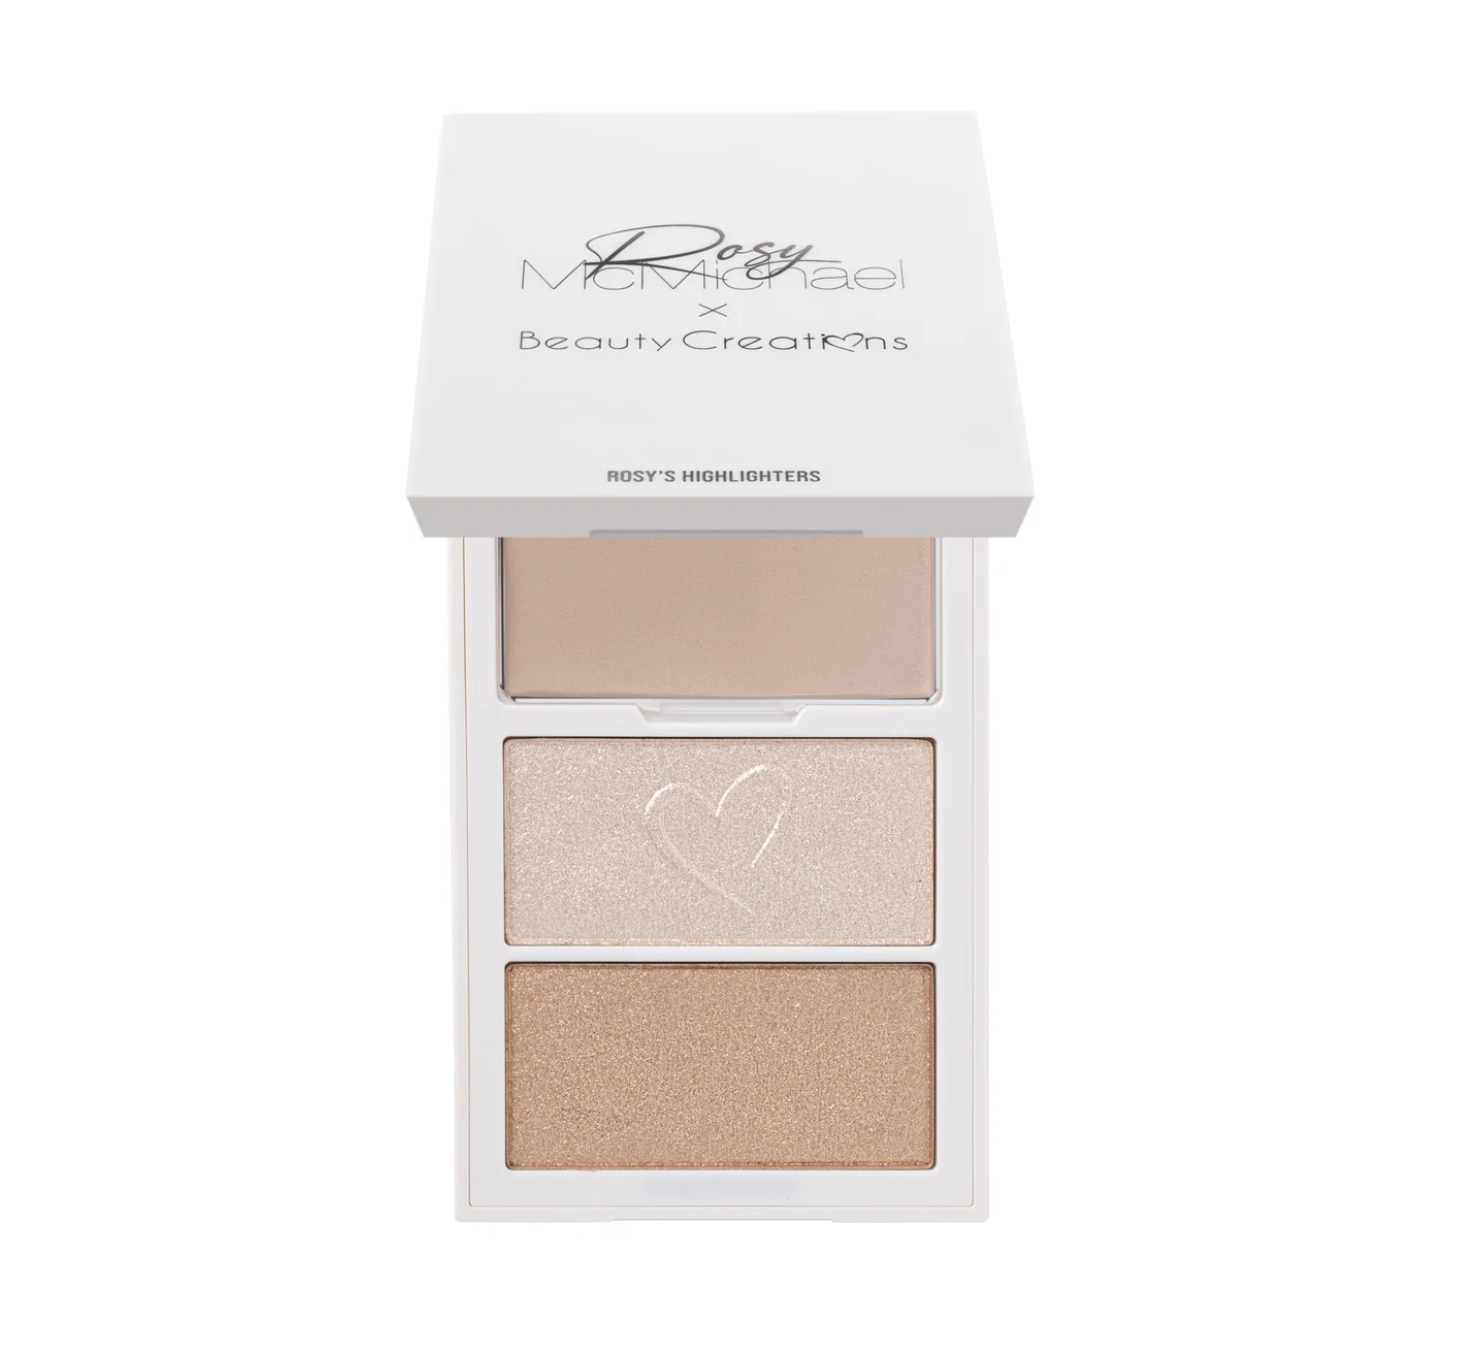 Beauty Creations - Rosy McMichael Vol 2 Rosy's Highlighter